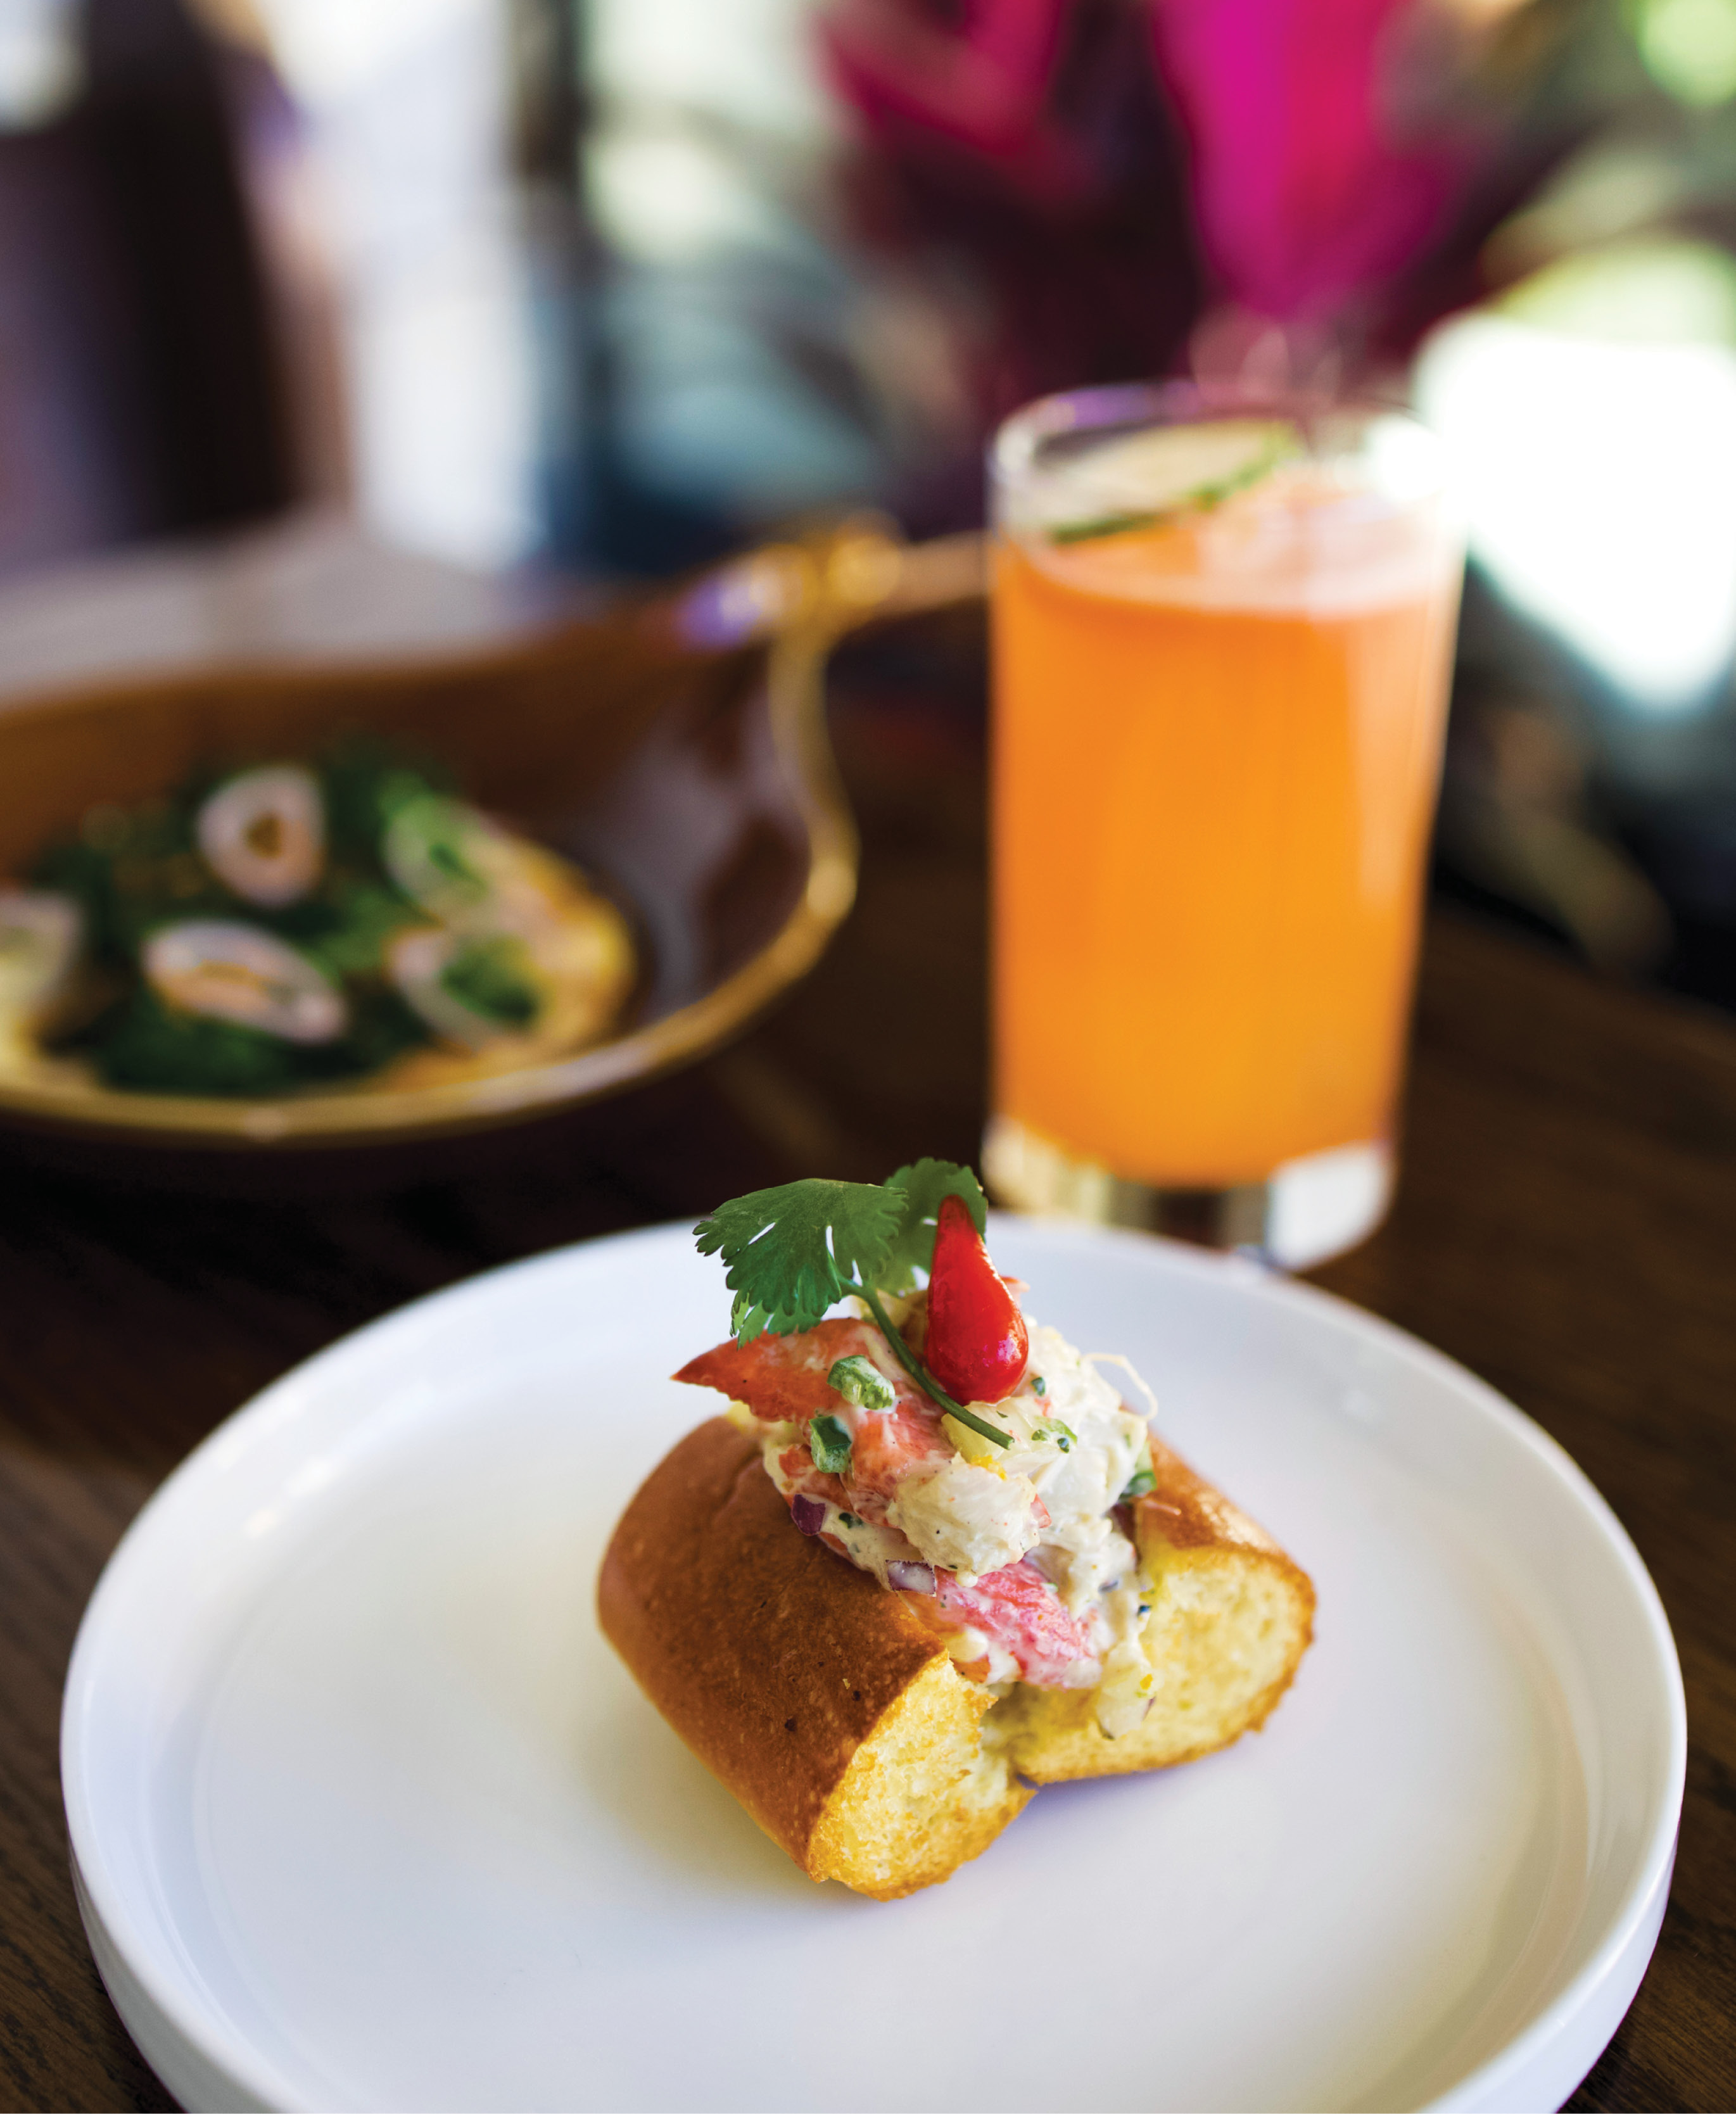 Lobster rolls and Chili dogs, oysters Rockefeller and beanie weenies: the high-low offerings at James Island hot spot Bar George